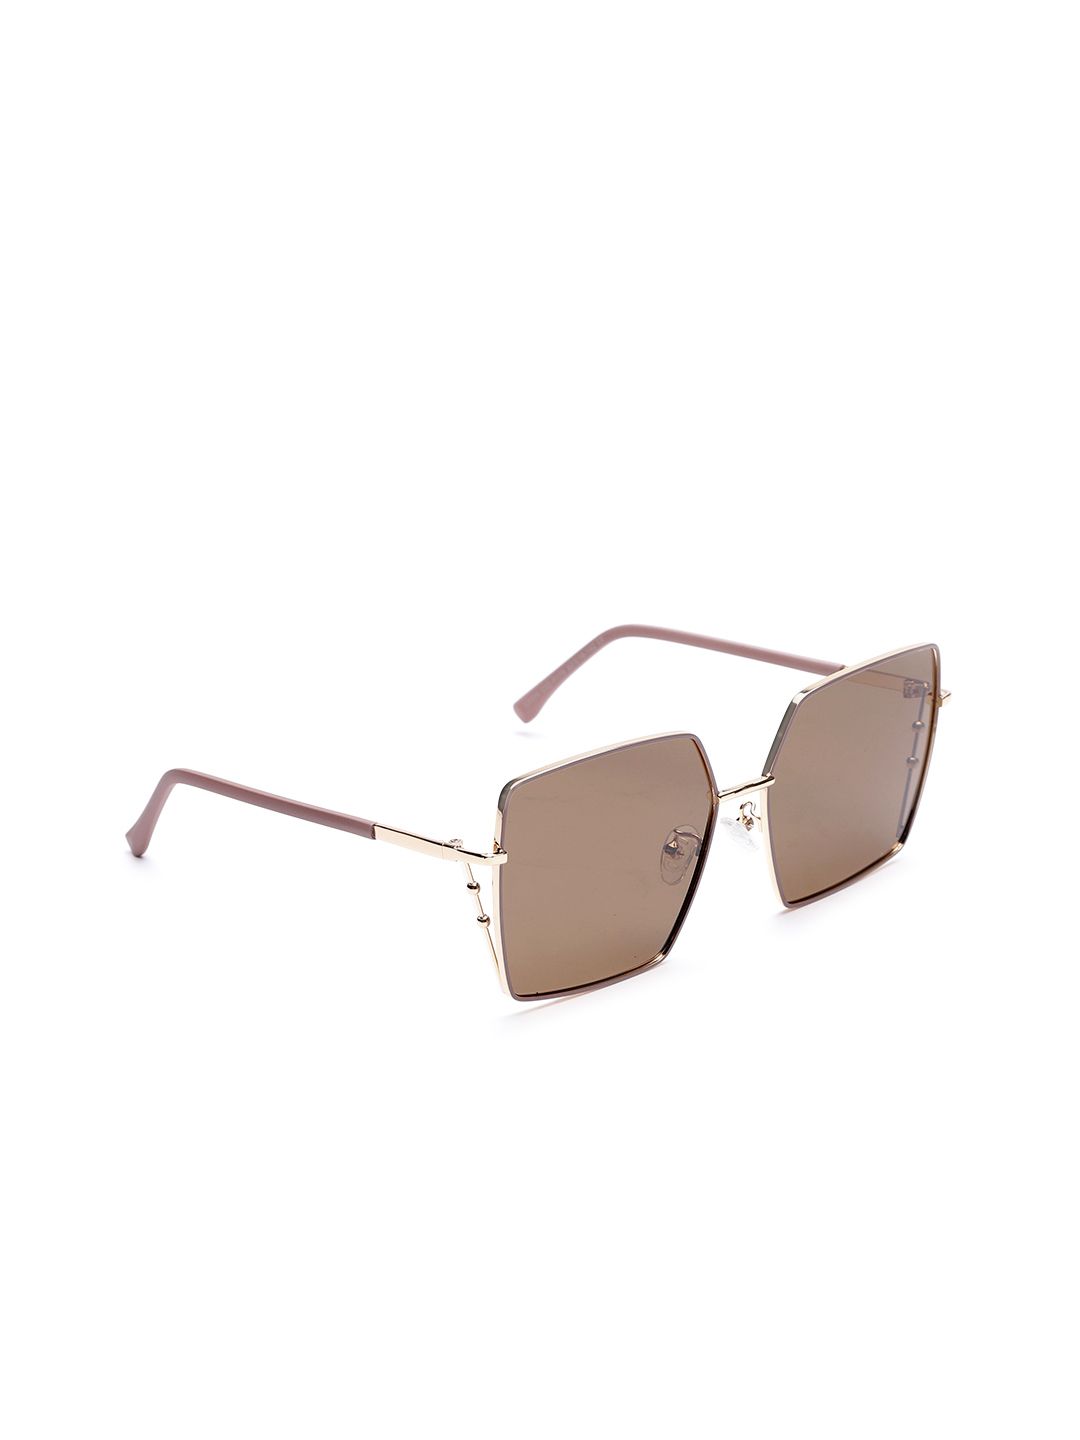 Carlton London Women Brown Lens & Gold-Toned Rectangle Sunglasses CLSW030 Price in India